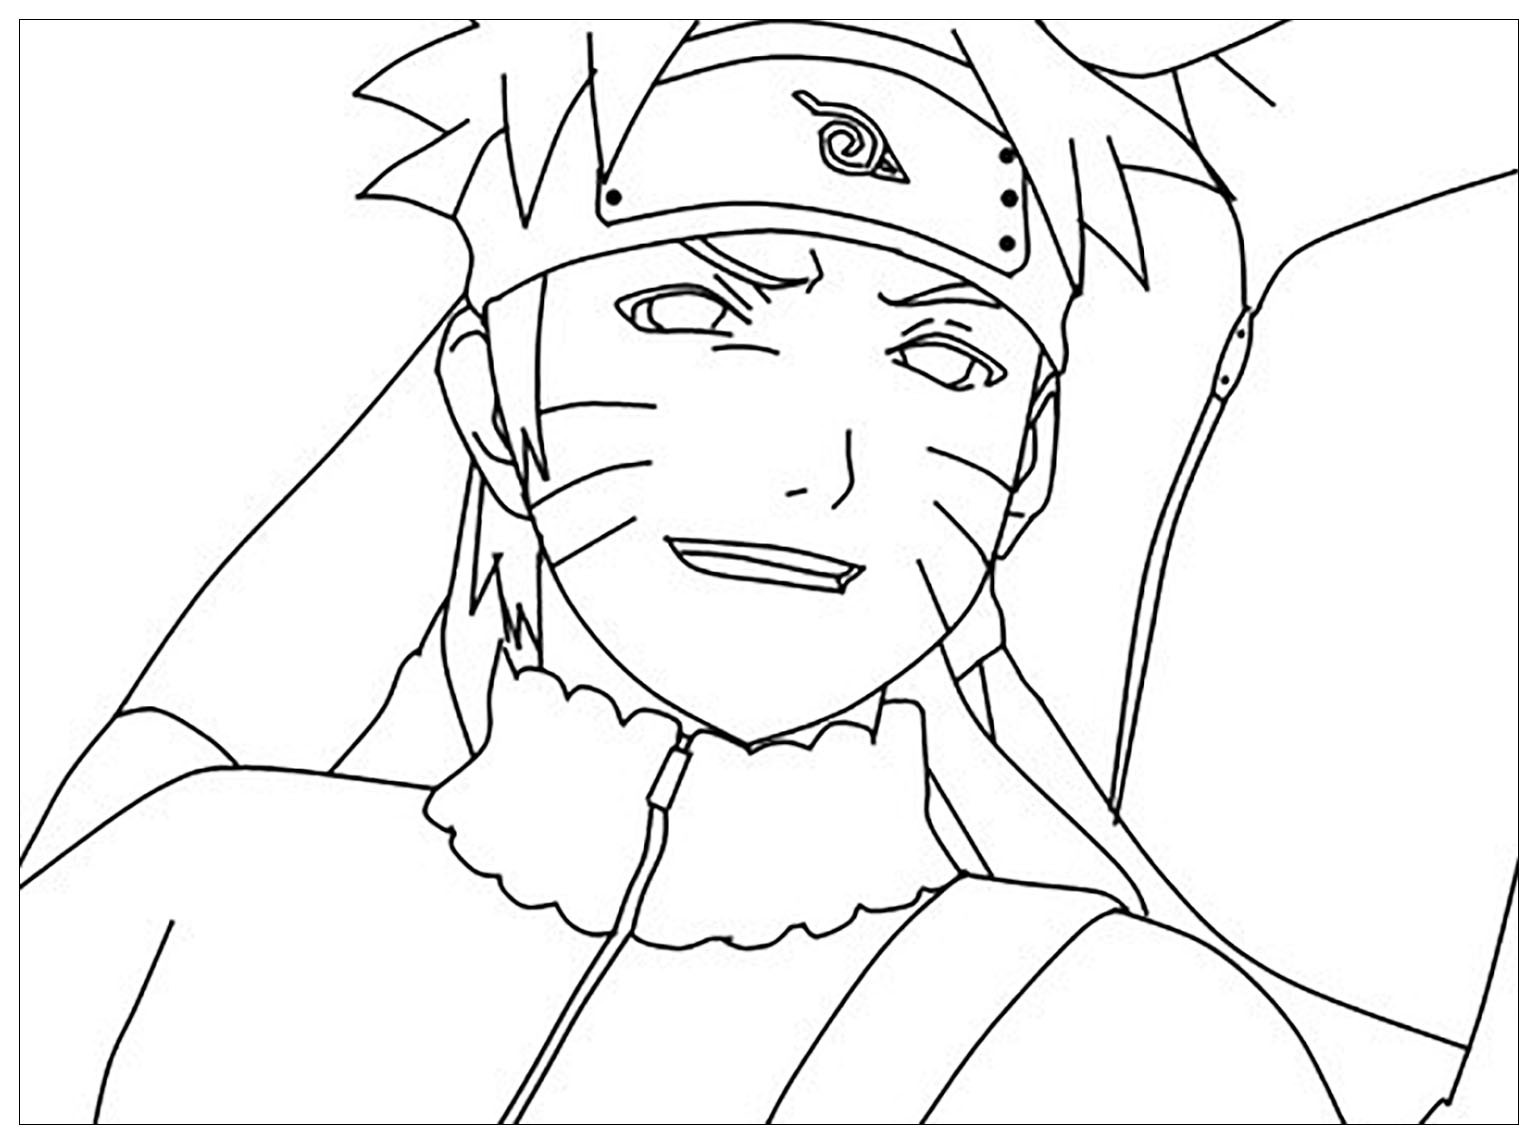 Download Naruto to color for kids - Naruto Kids Coloring Pages